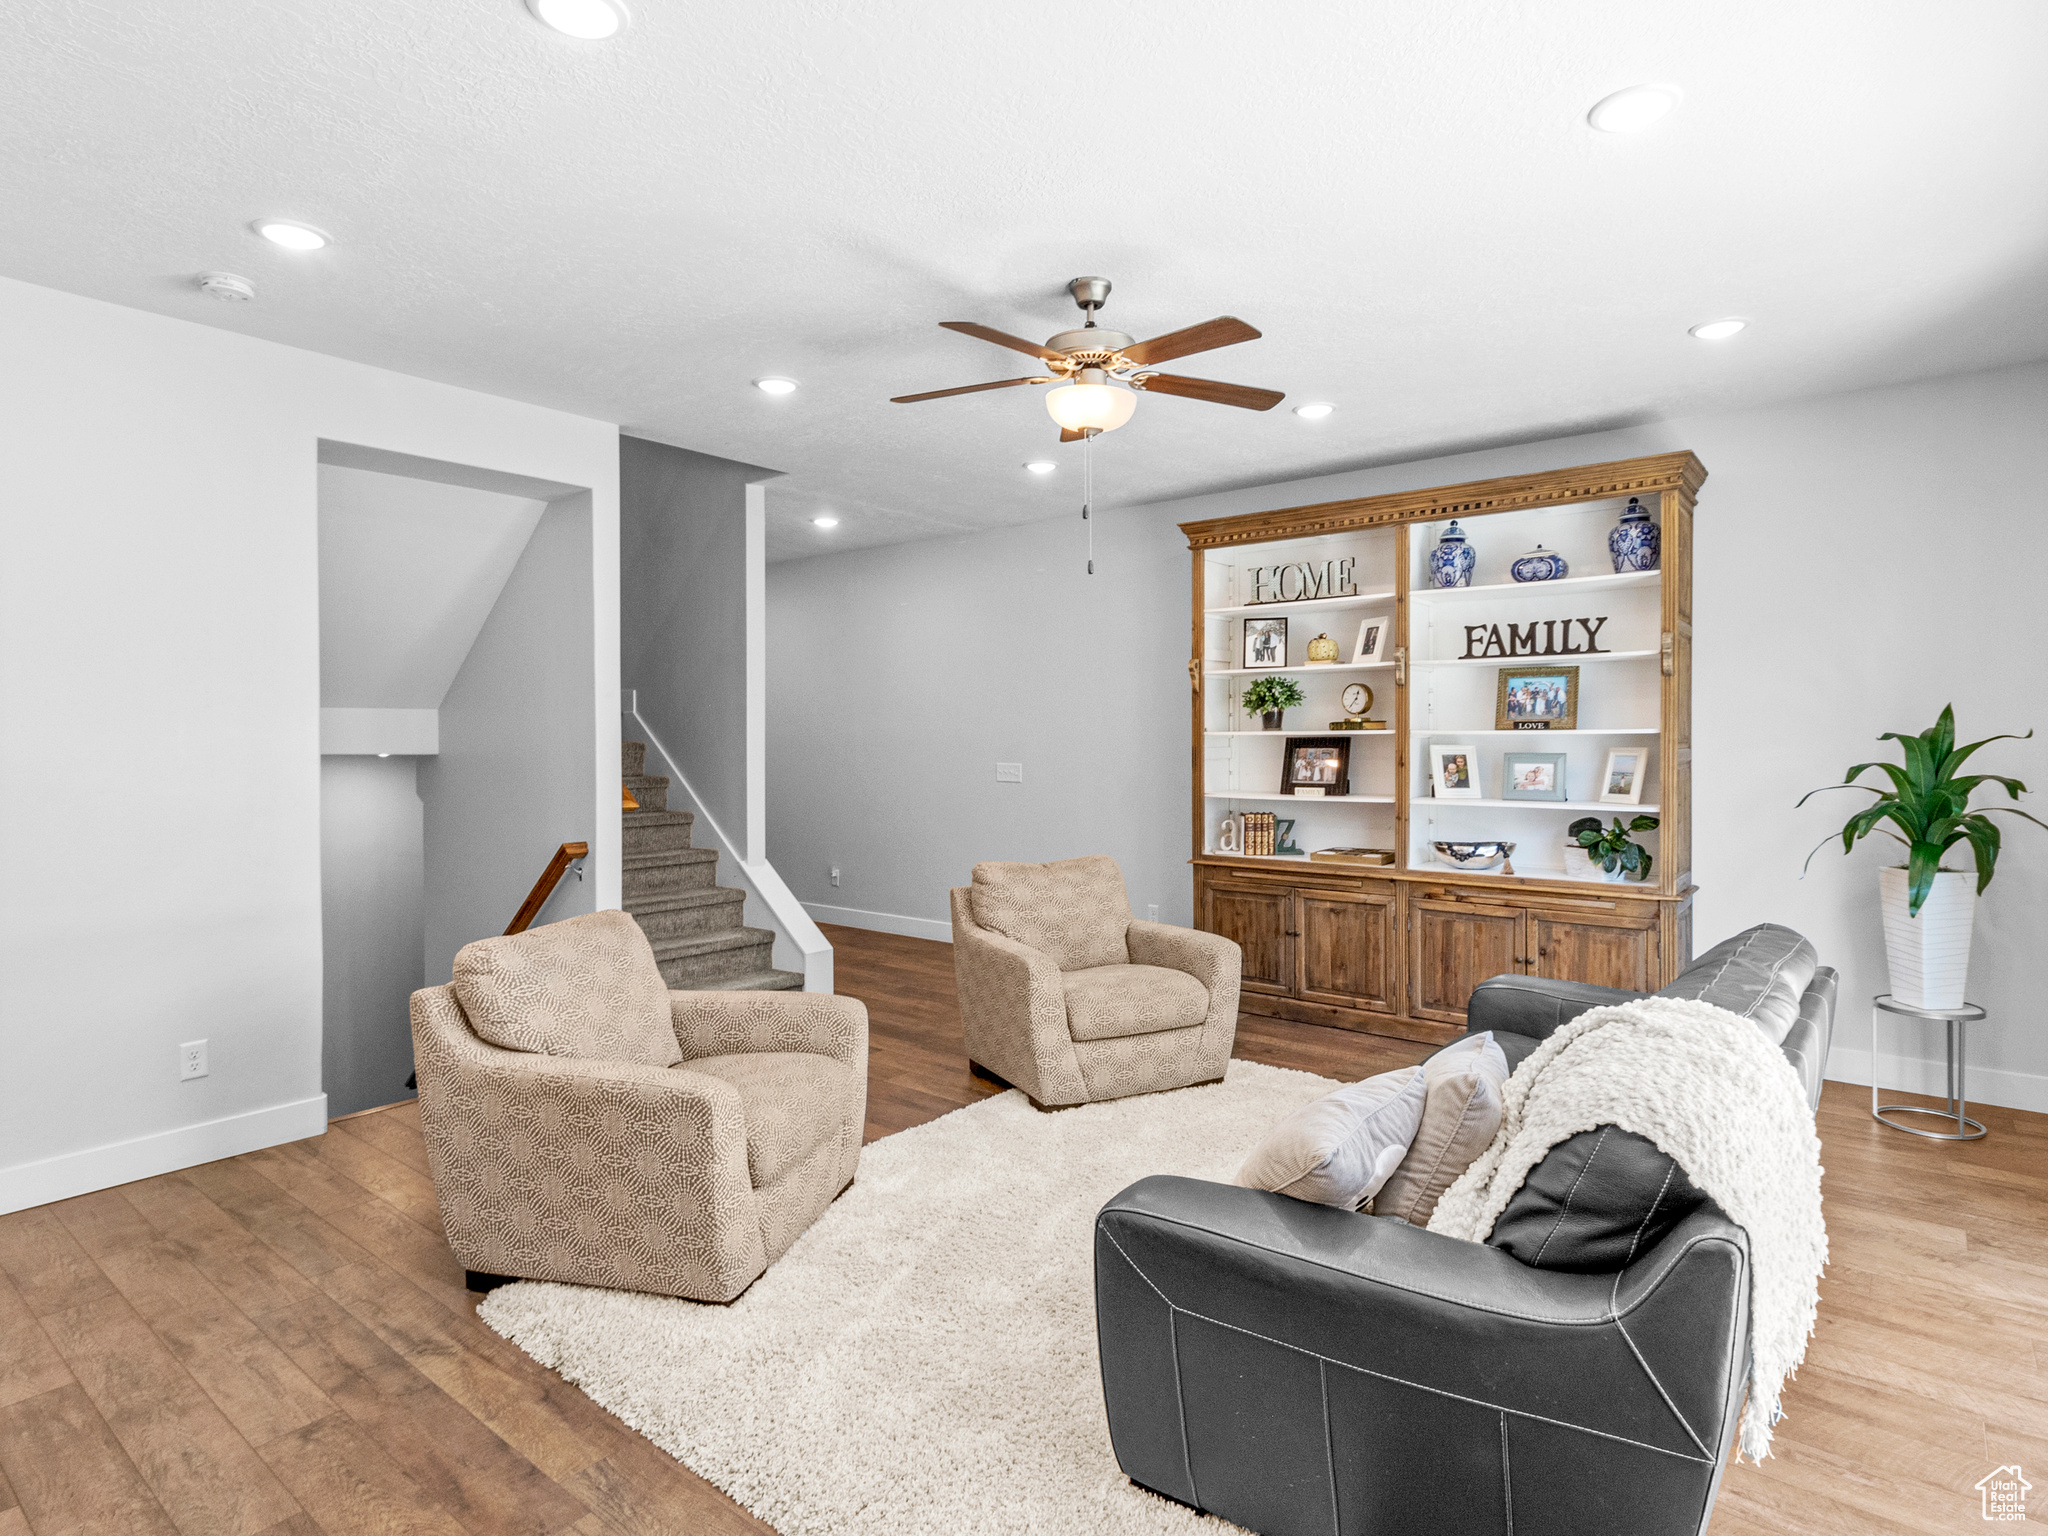 Living room with built in features, wood-type flooring, and ceiling fan